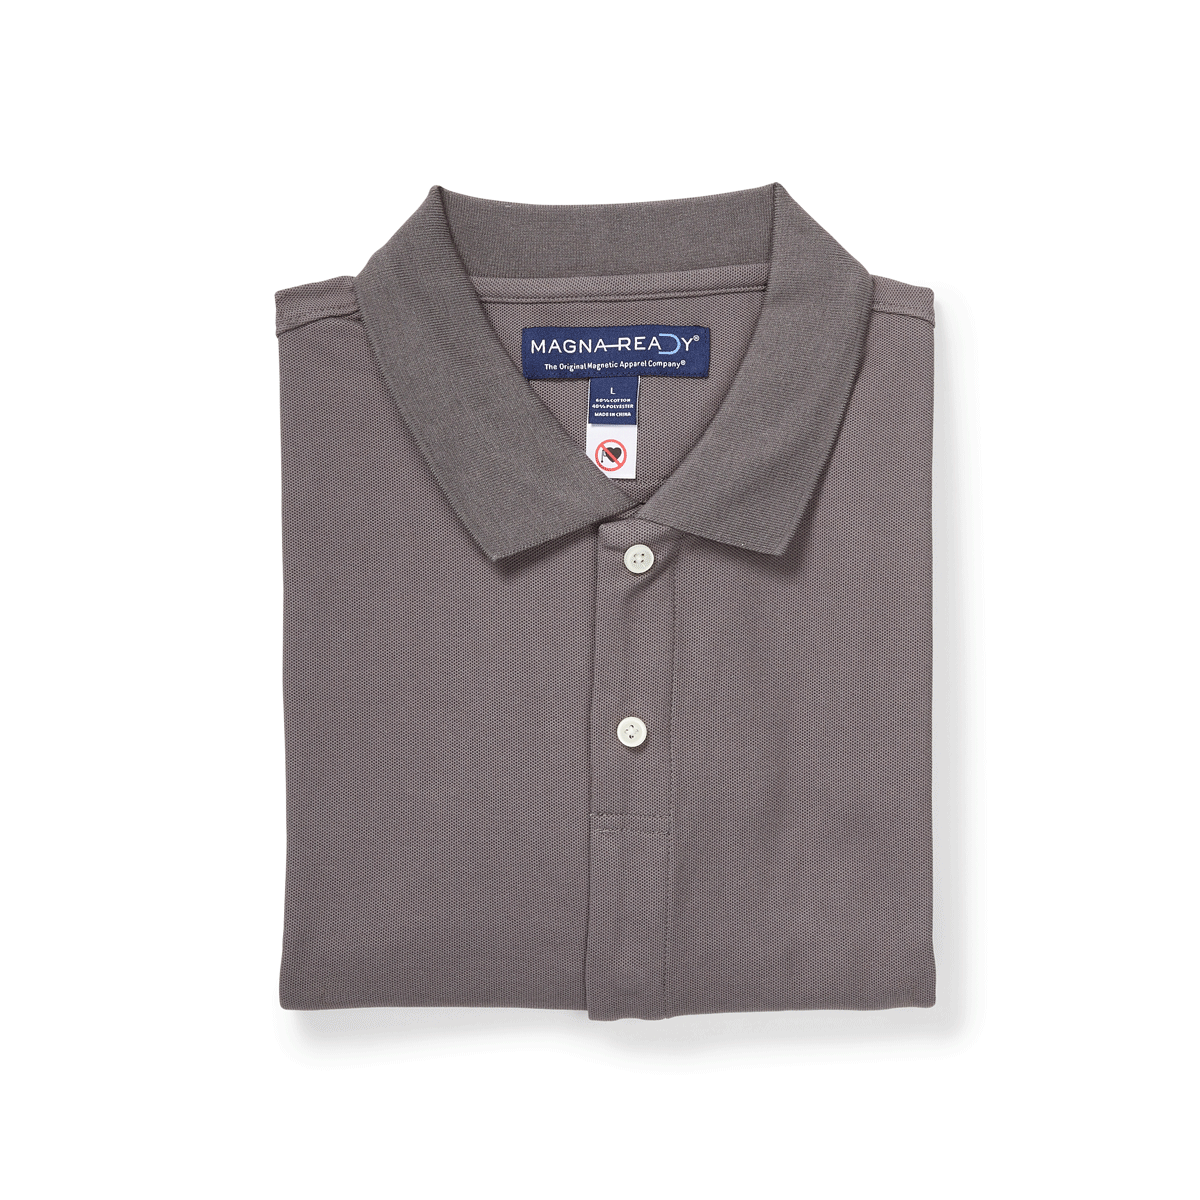 Grey Pique Knit Short Sleeve Polo with Magnetic Closures